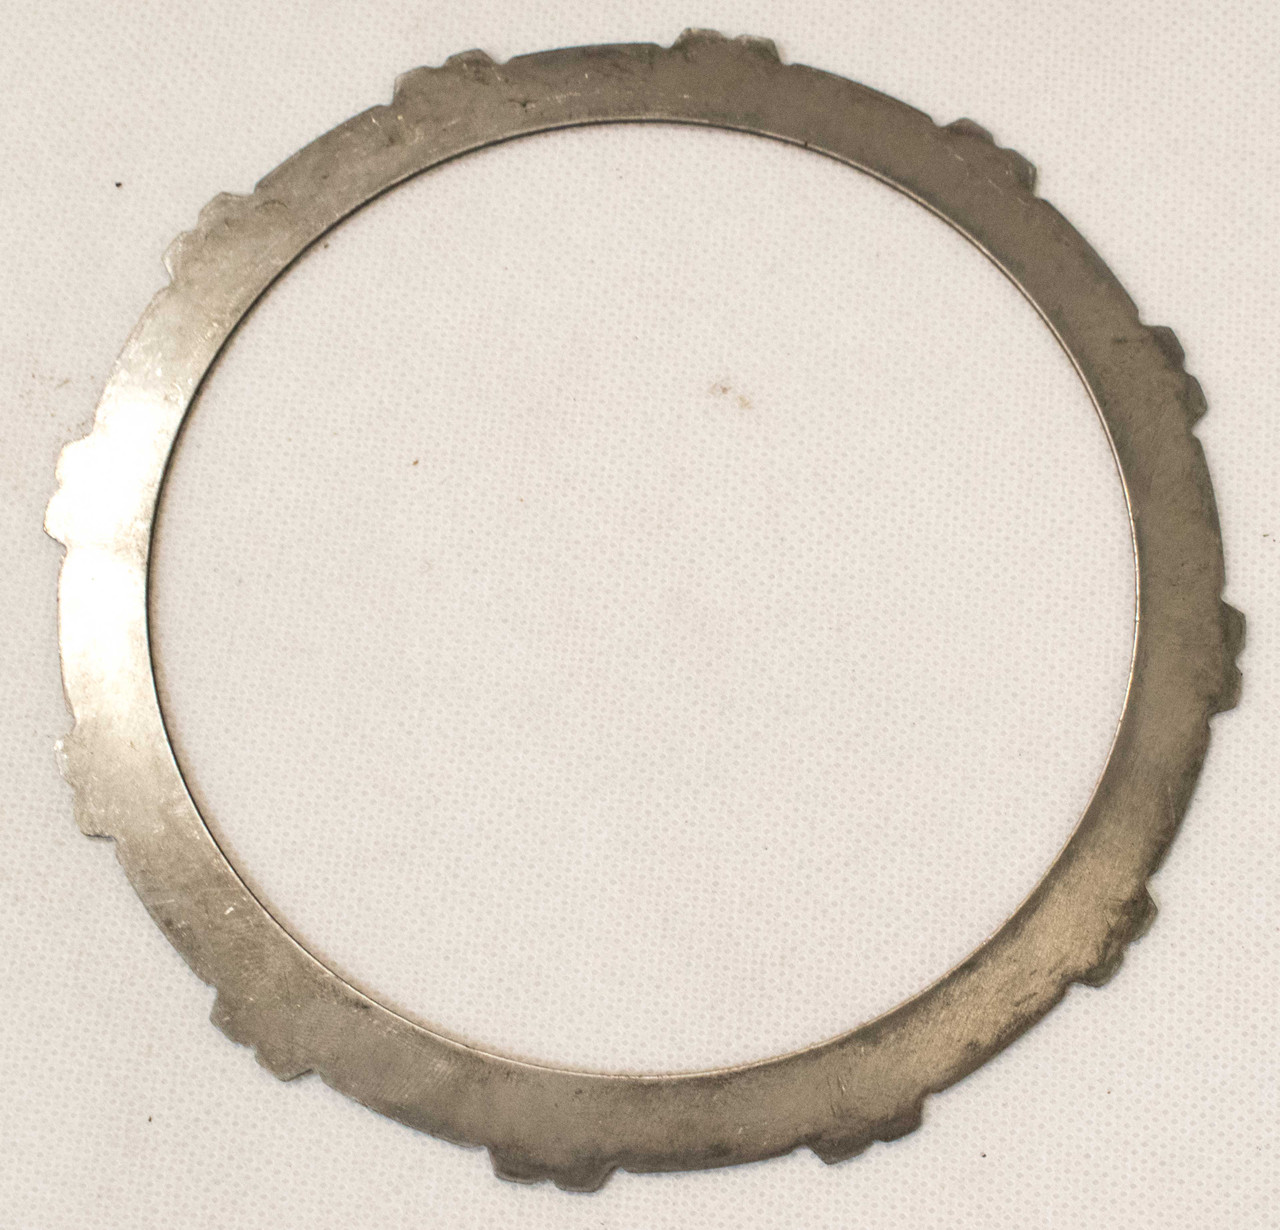 A518 A618 Overdrive Direct Clutch Steel Plate (1997-2003)